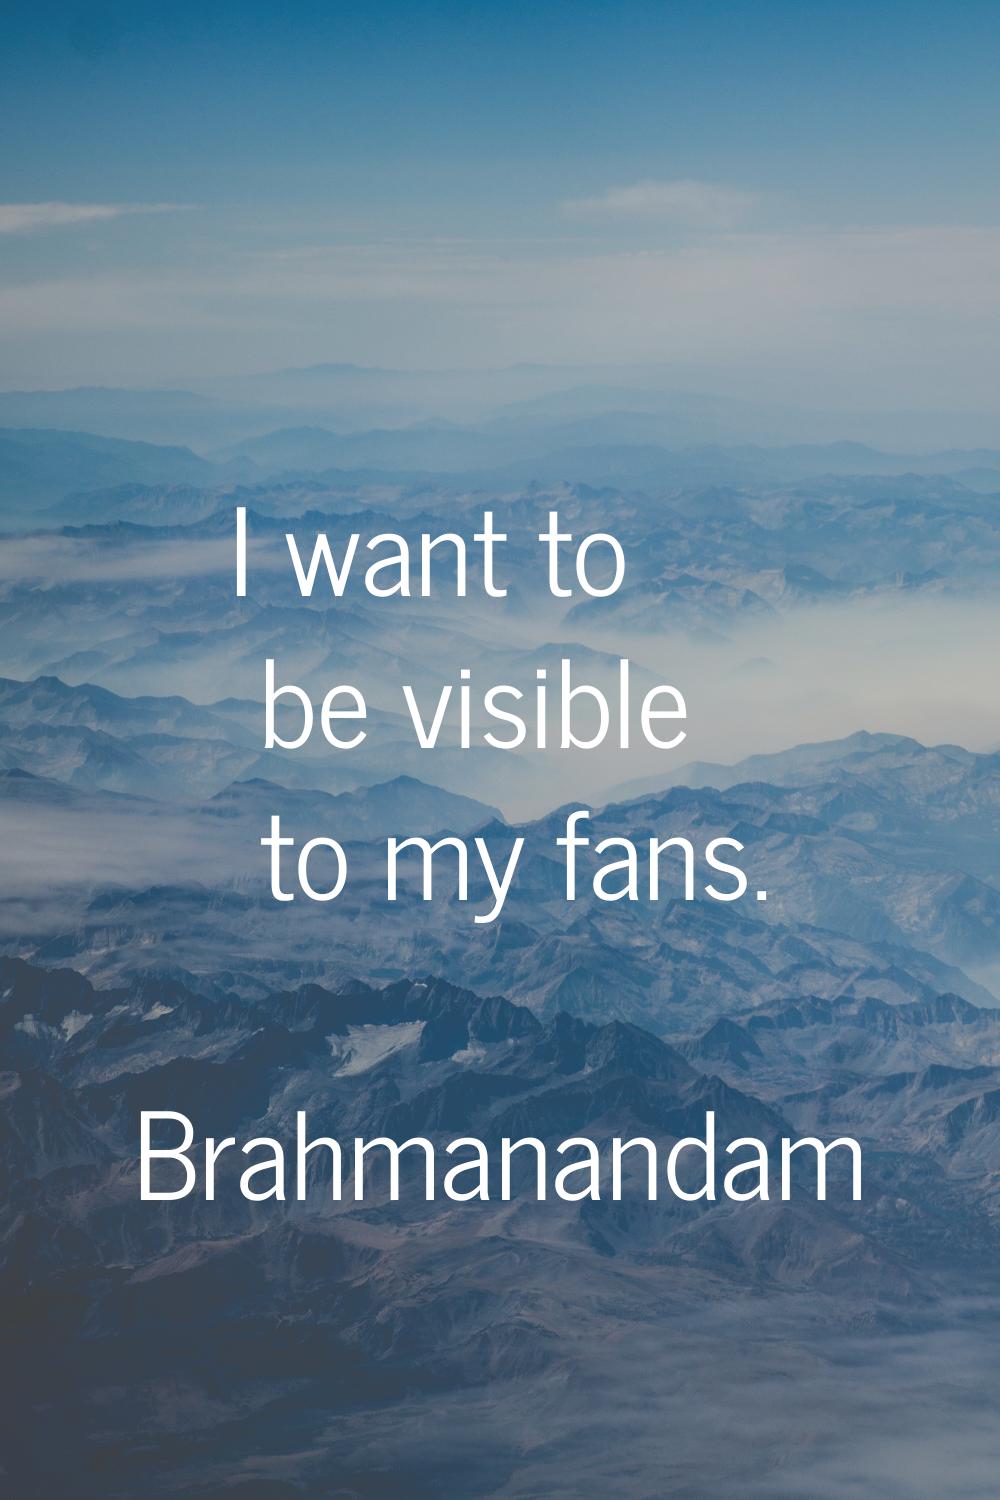 I want to be visible to my fans.